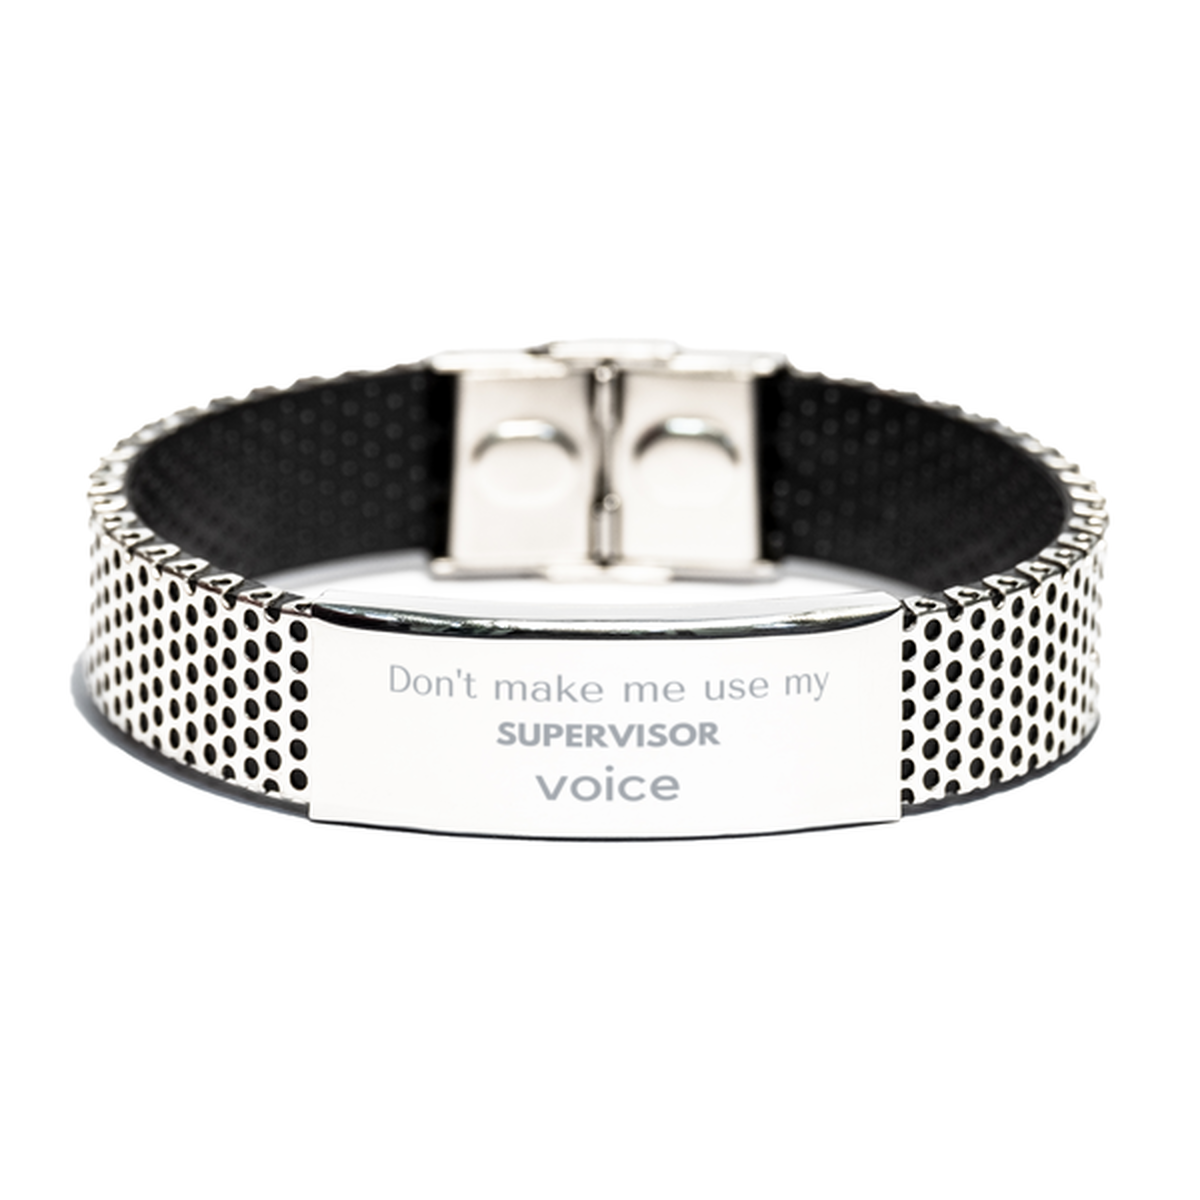 Don't make me use my Supervisor voice, Sarcasm Supervisor Gifts, Christmas Supervisor Stainless Steel Bracelet Birthday Unique Gifts For Supervisor Coworkers, Men, Women, Colleague, Friends